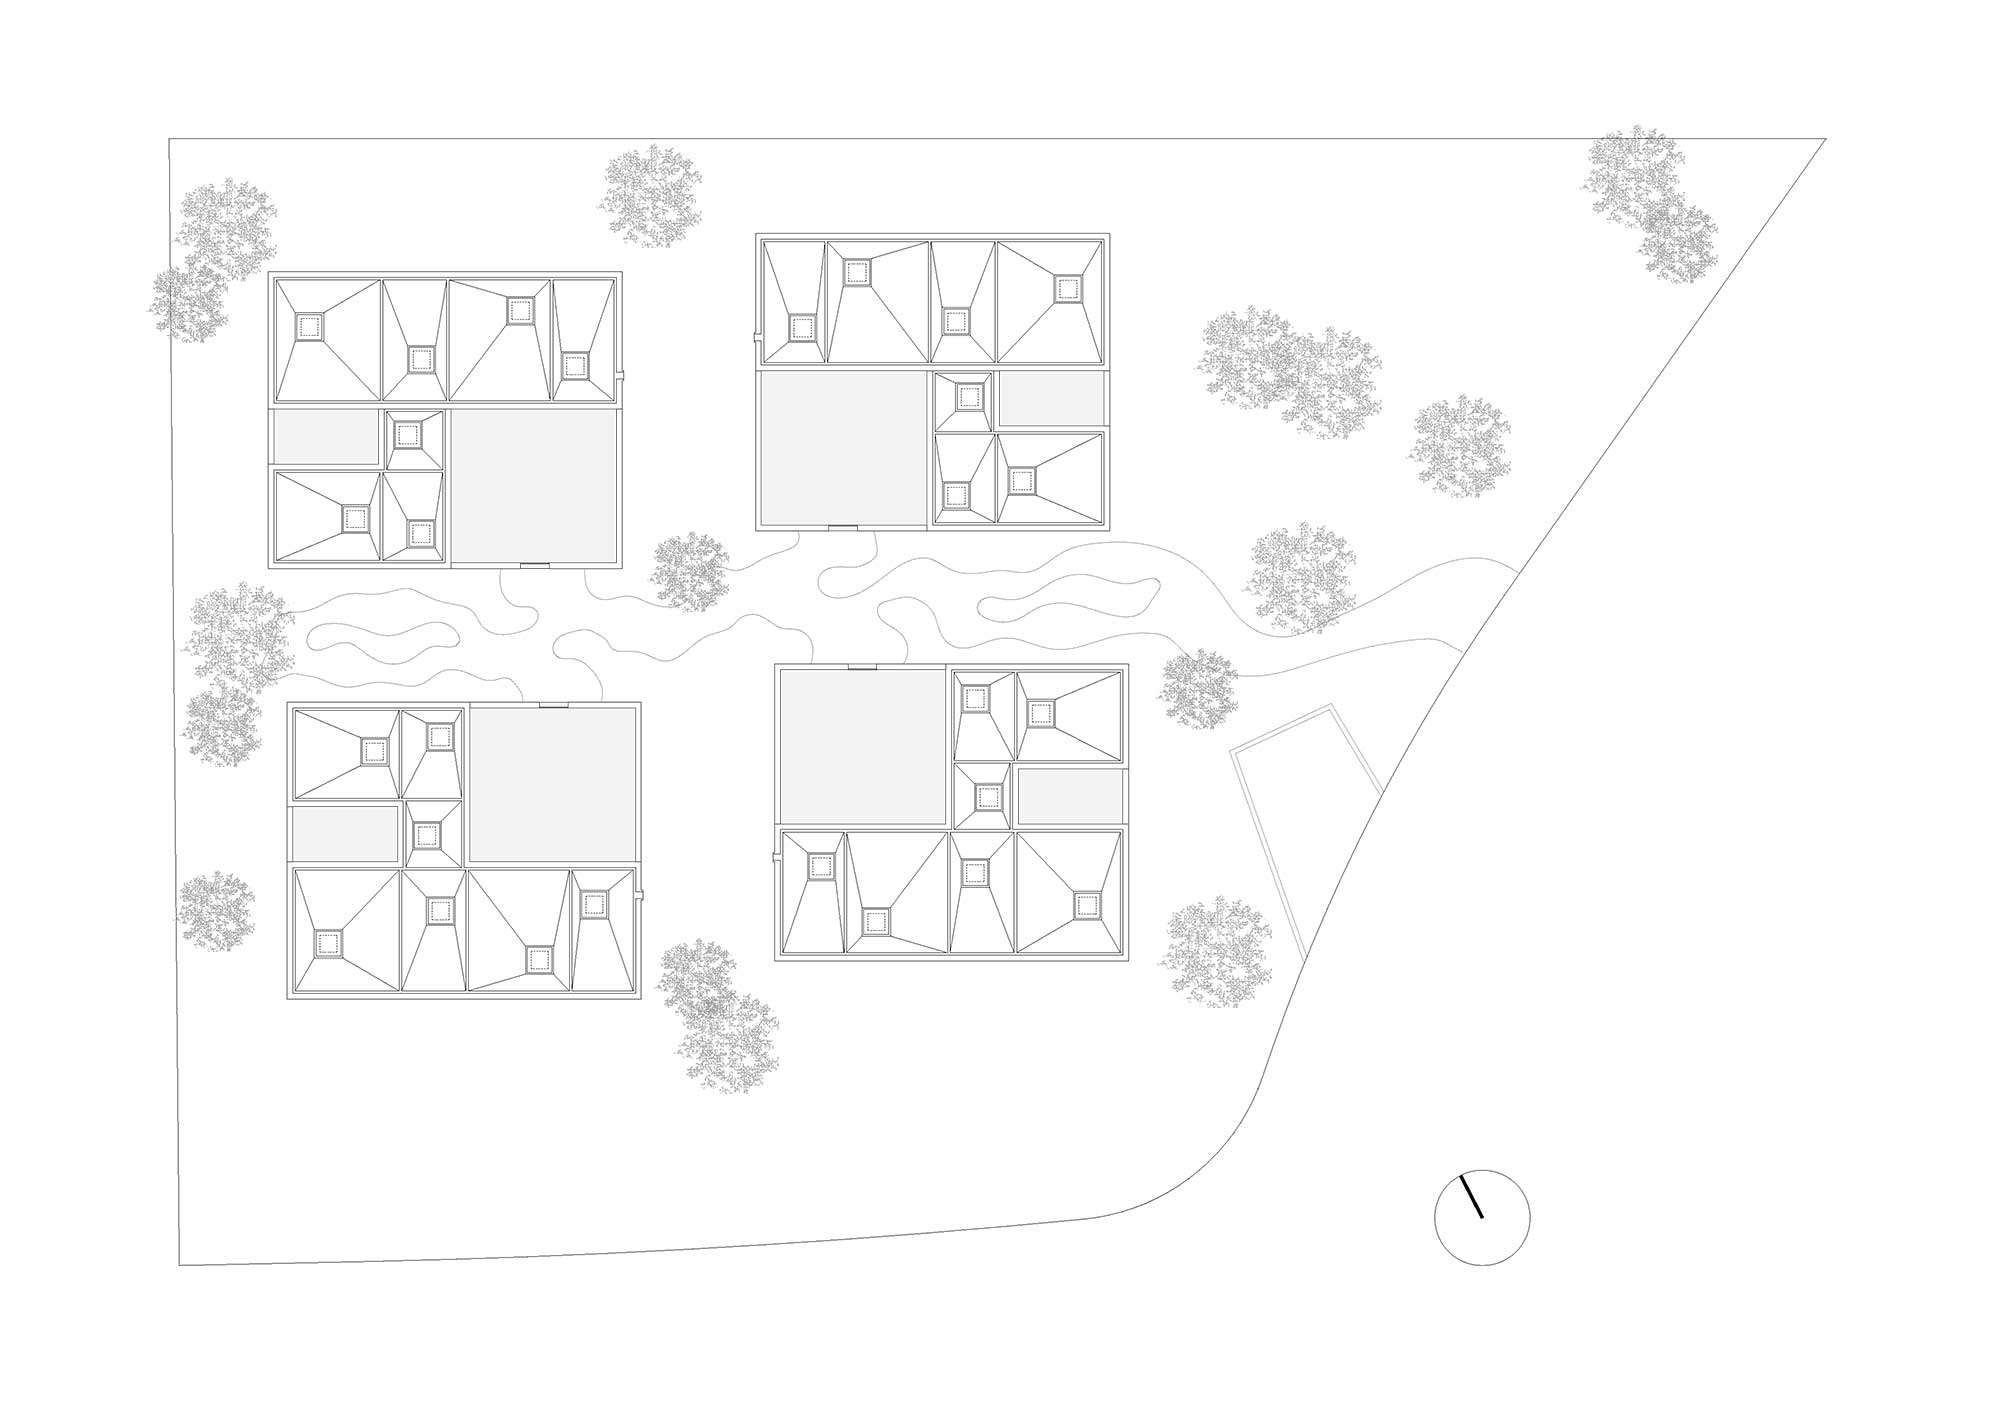 Site Plan - Courtyard Houses in Zumikon / Think Architecture